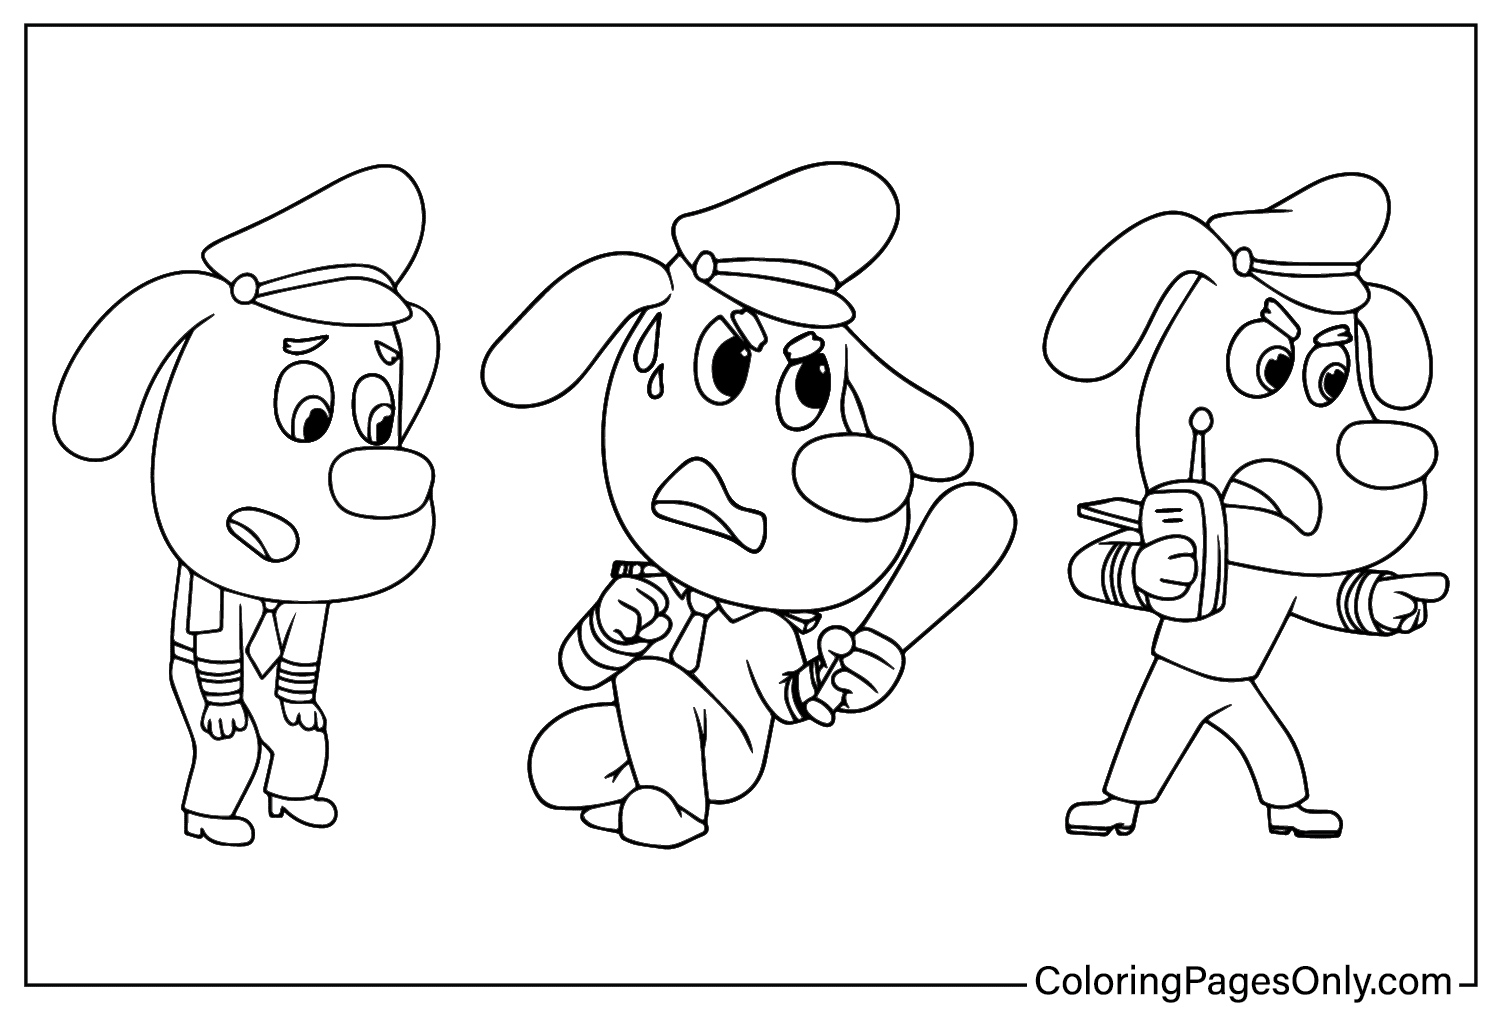 Sheriff Labrador Coloring Page from Safety Sheriff Labrador